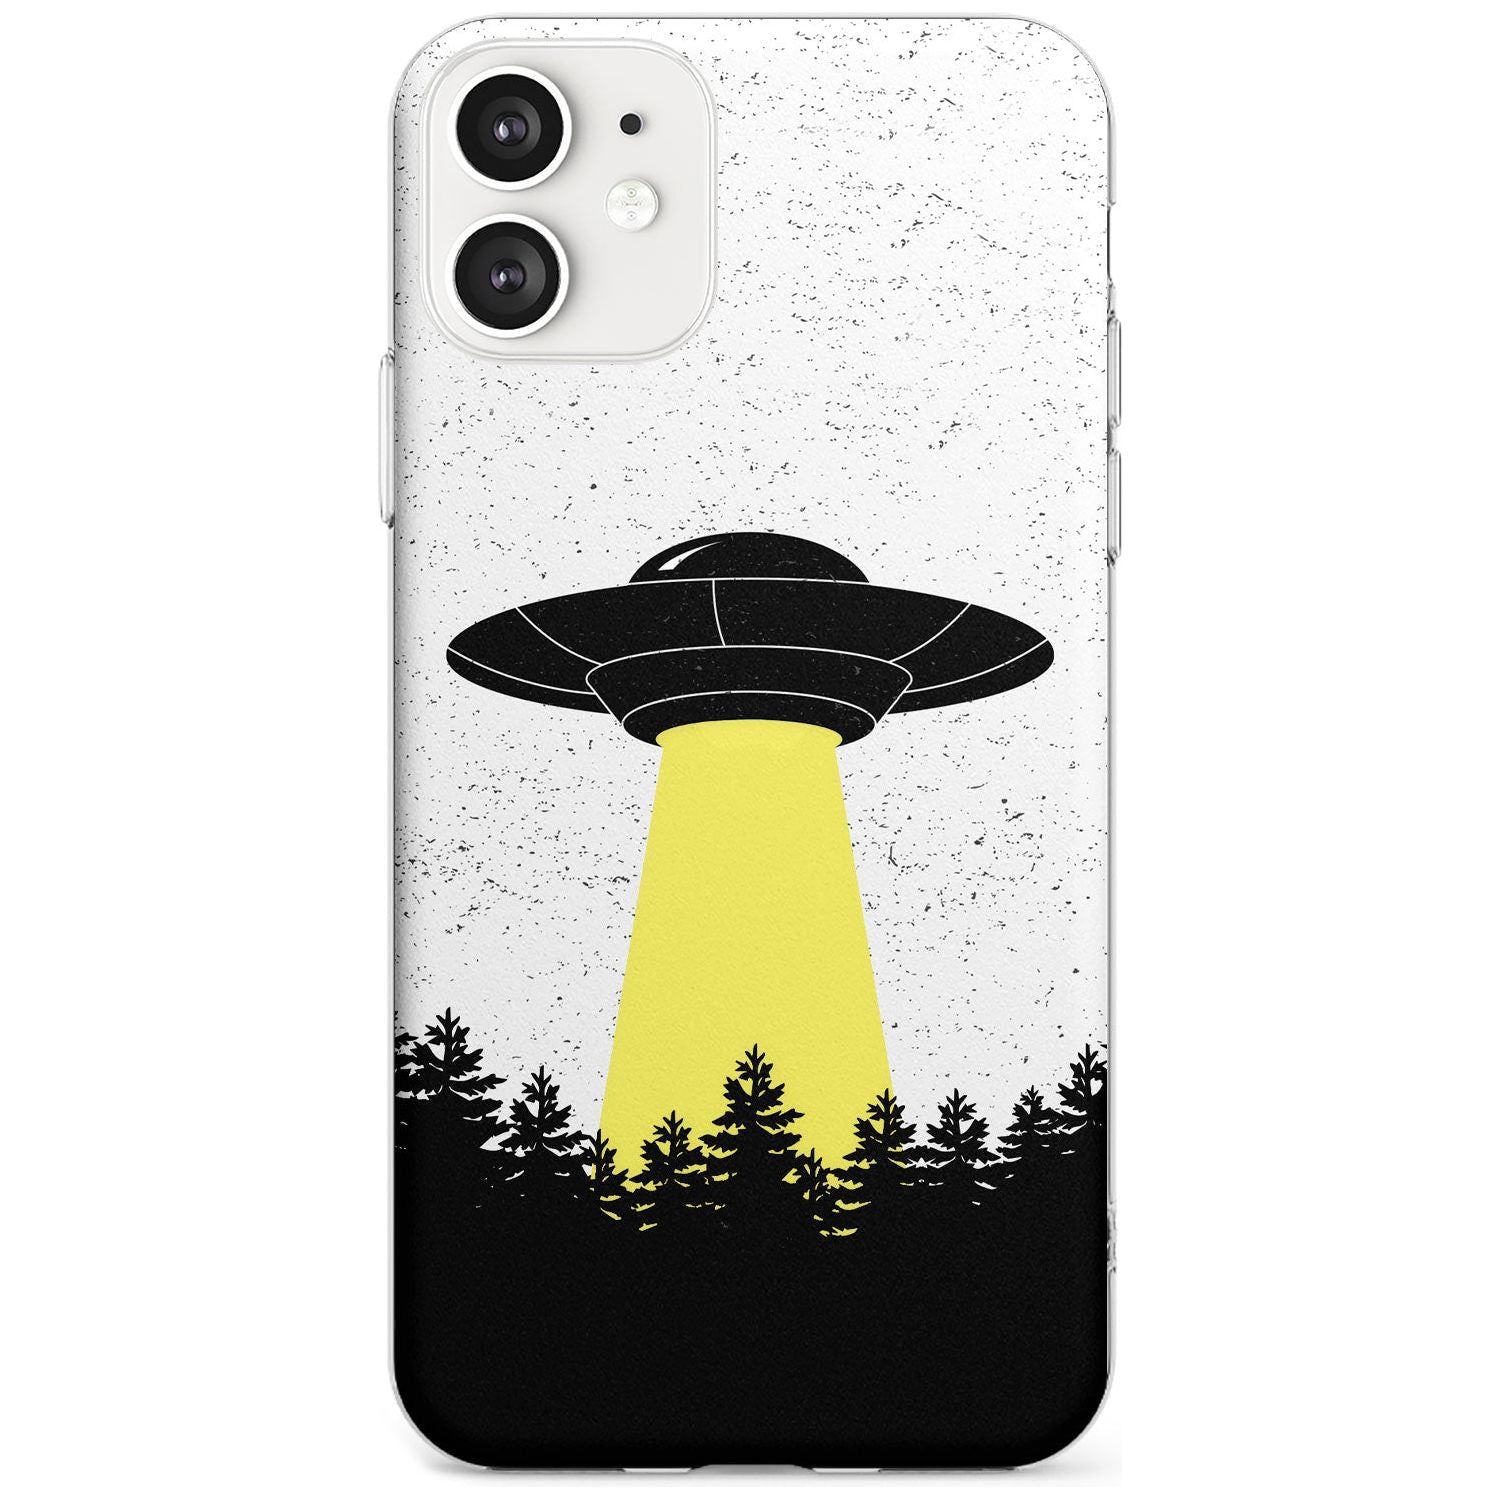 Forest Abduction Slim TPU Phone Case for iPhone 11